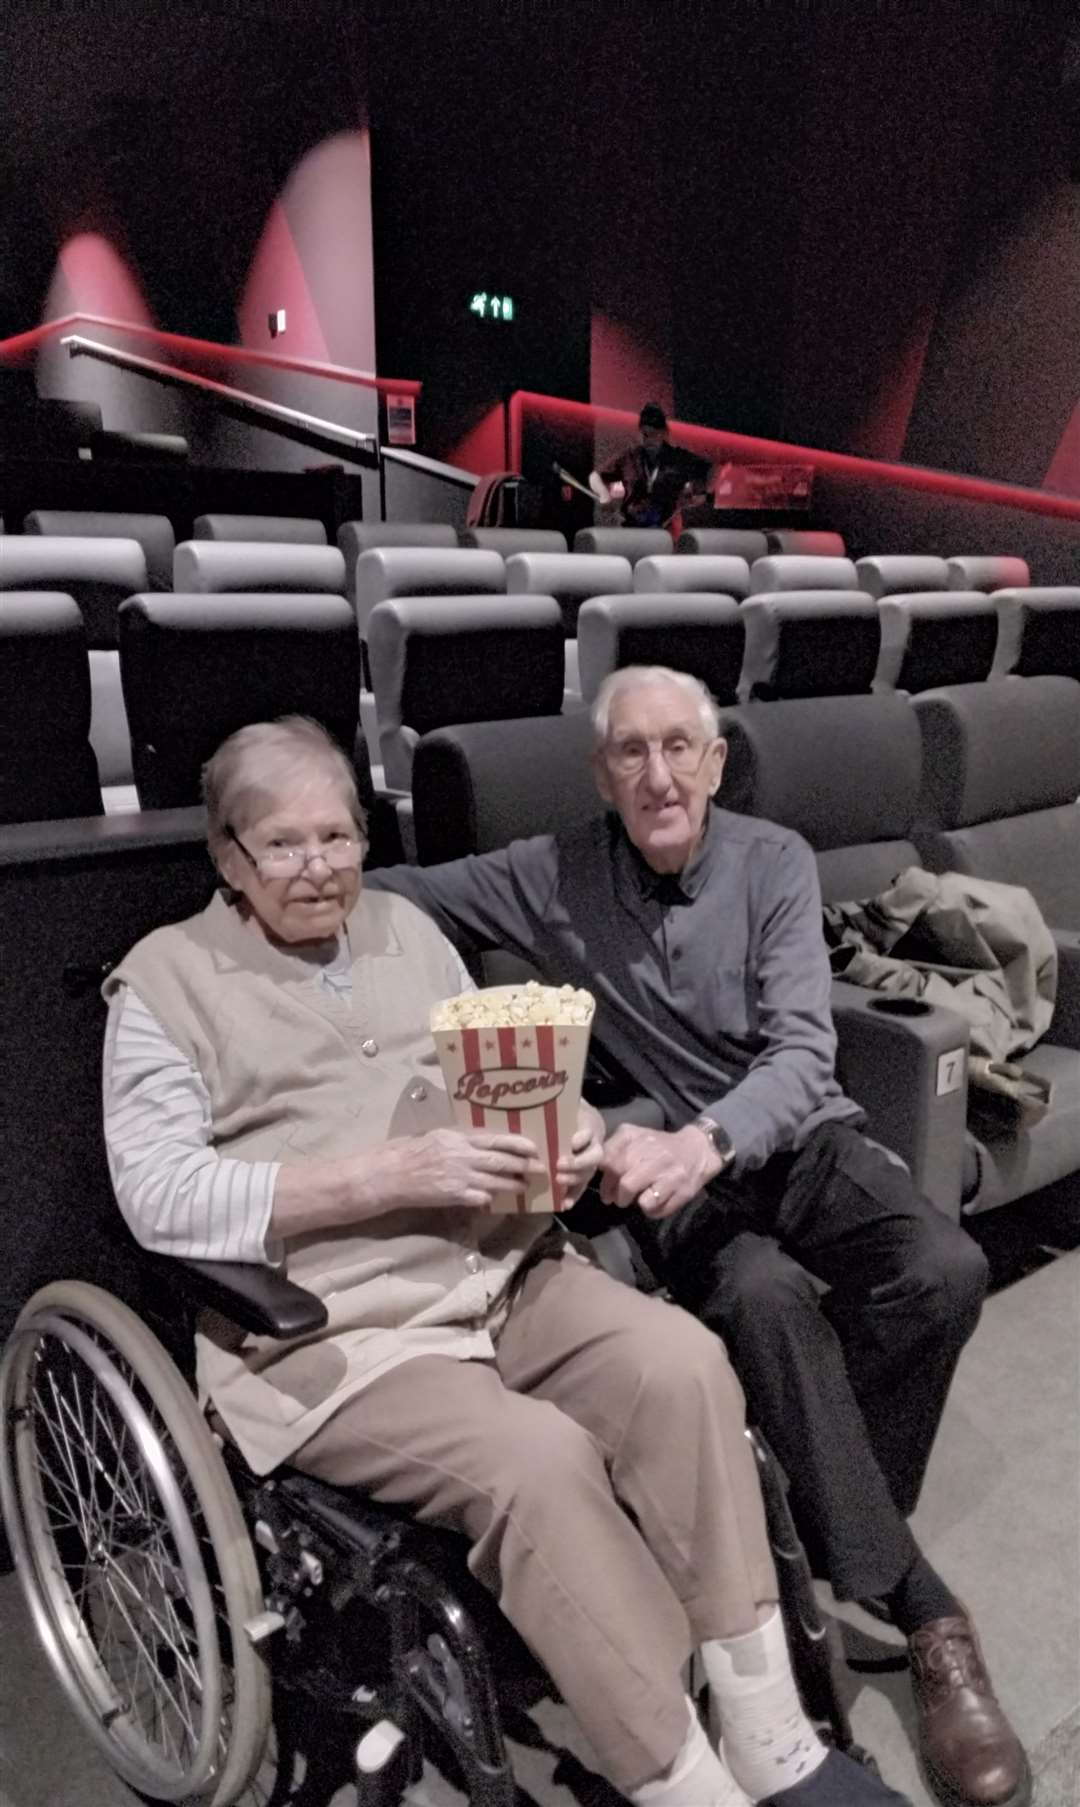 Hilda and Louie Neil took a trip down memory lane for Valentine's Day by recreating their very first date with a visit to the cinema.